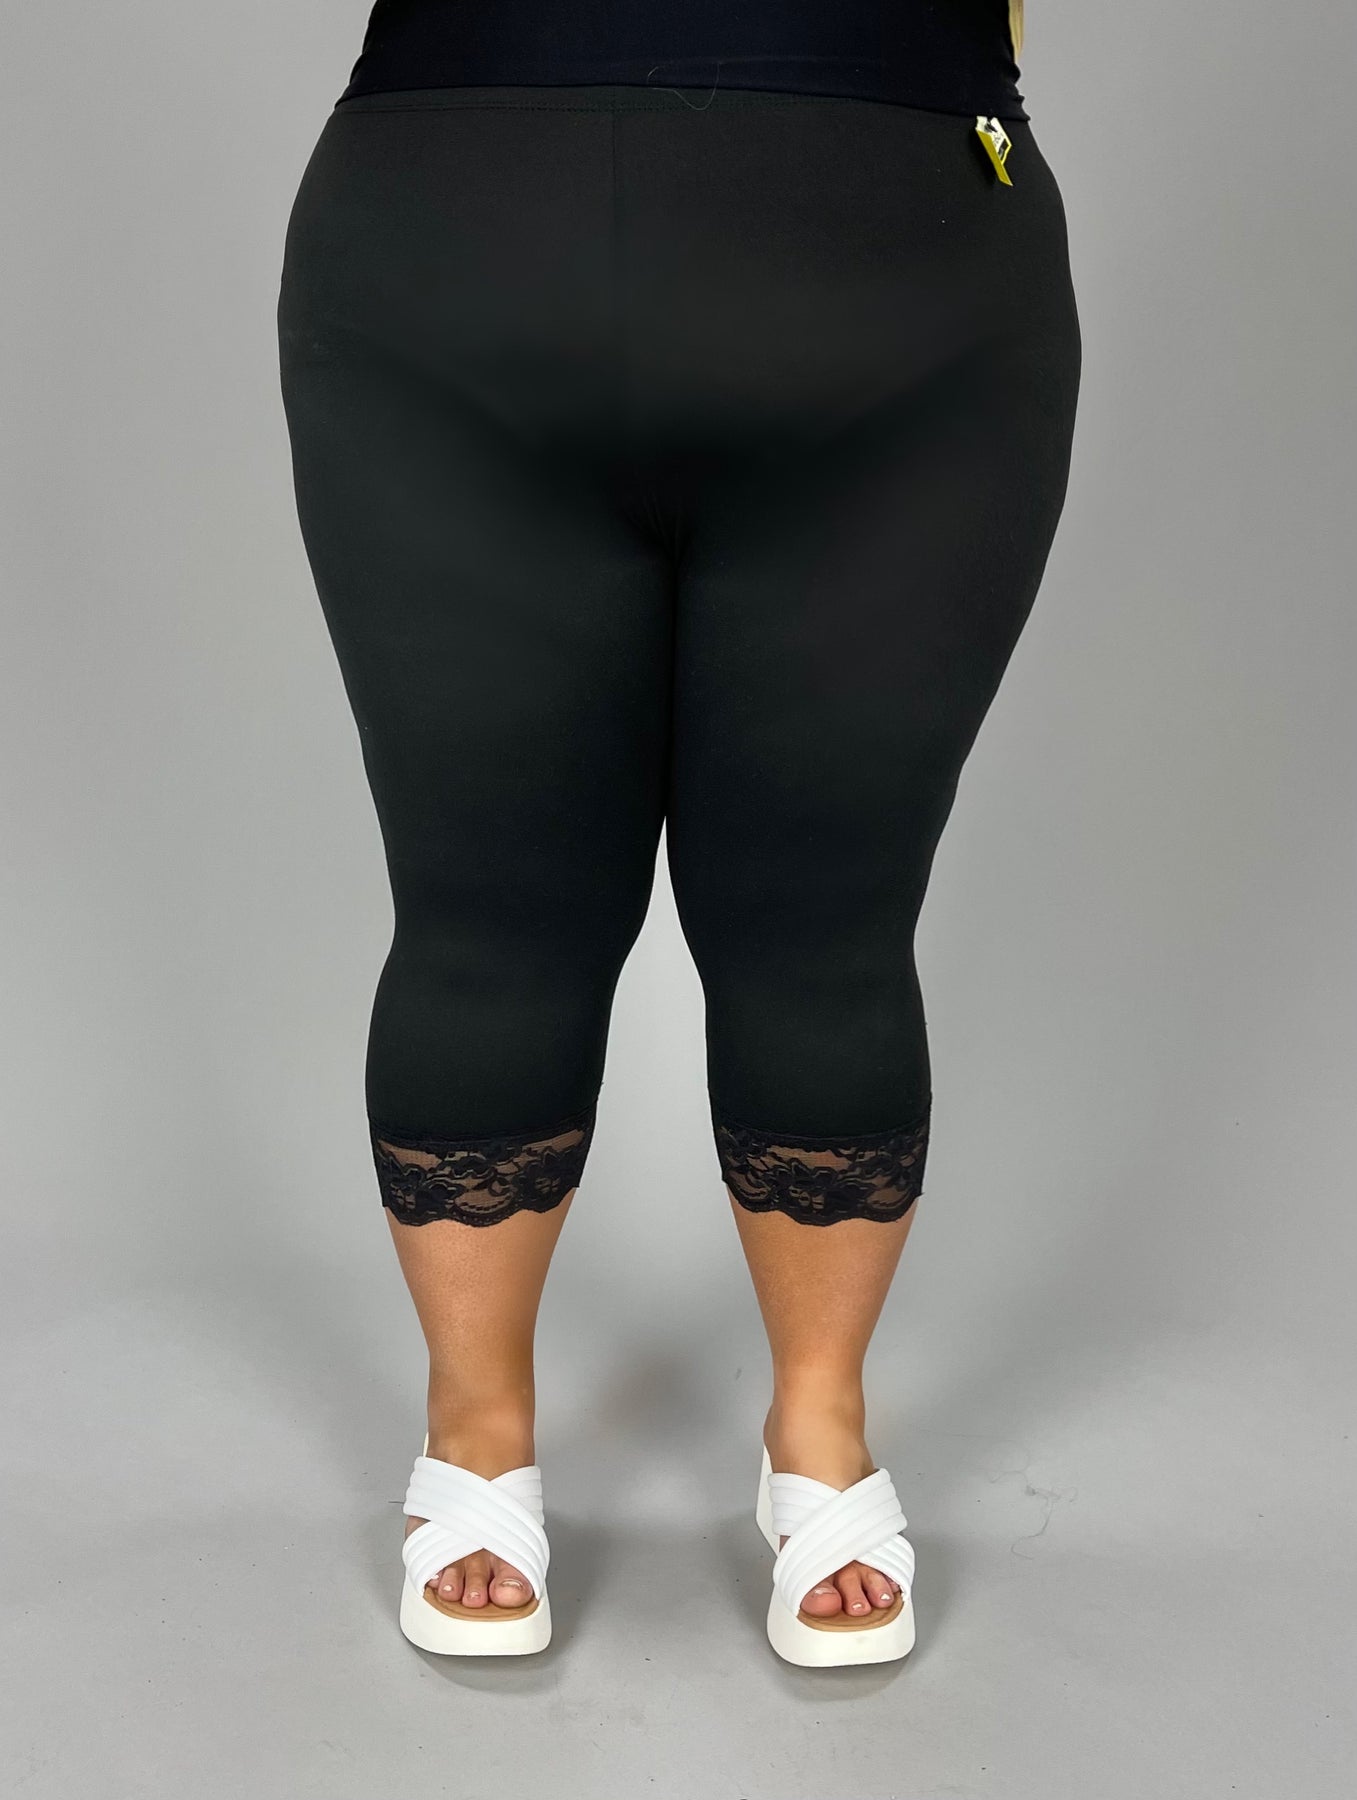 Cool Wholesale black lace capri legging In Any Size And Style